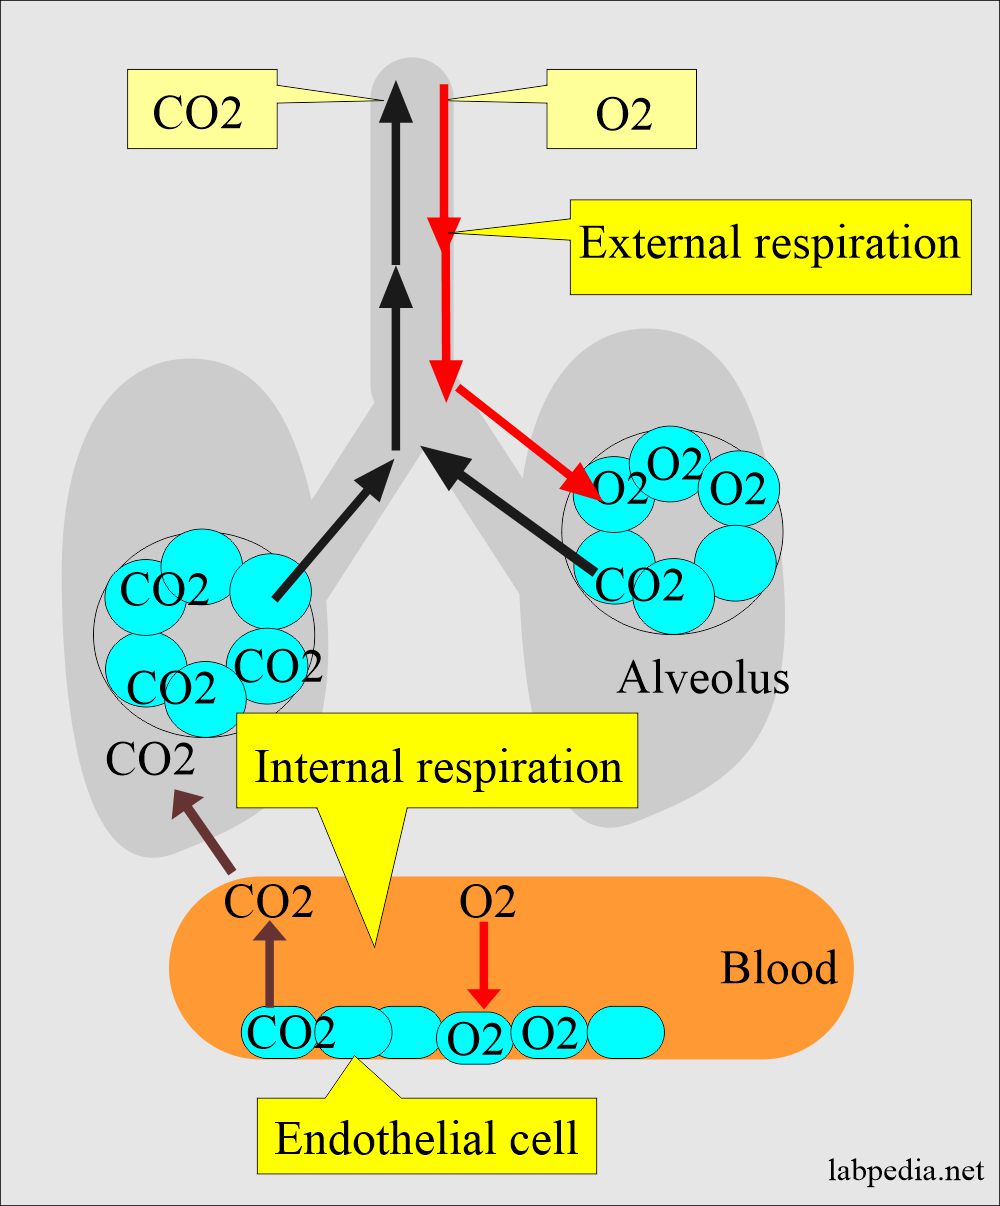 Acid-base lung role of respiration